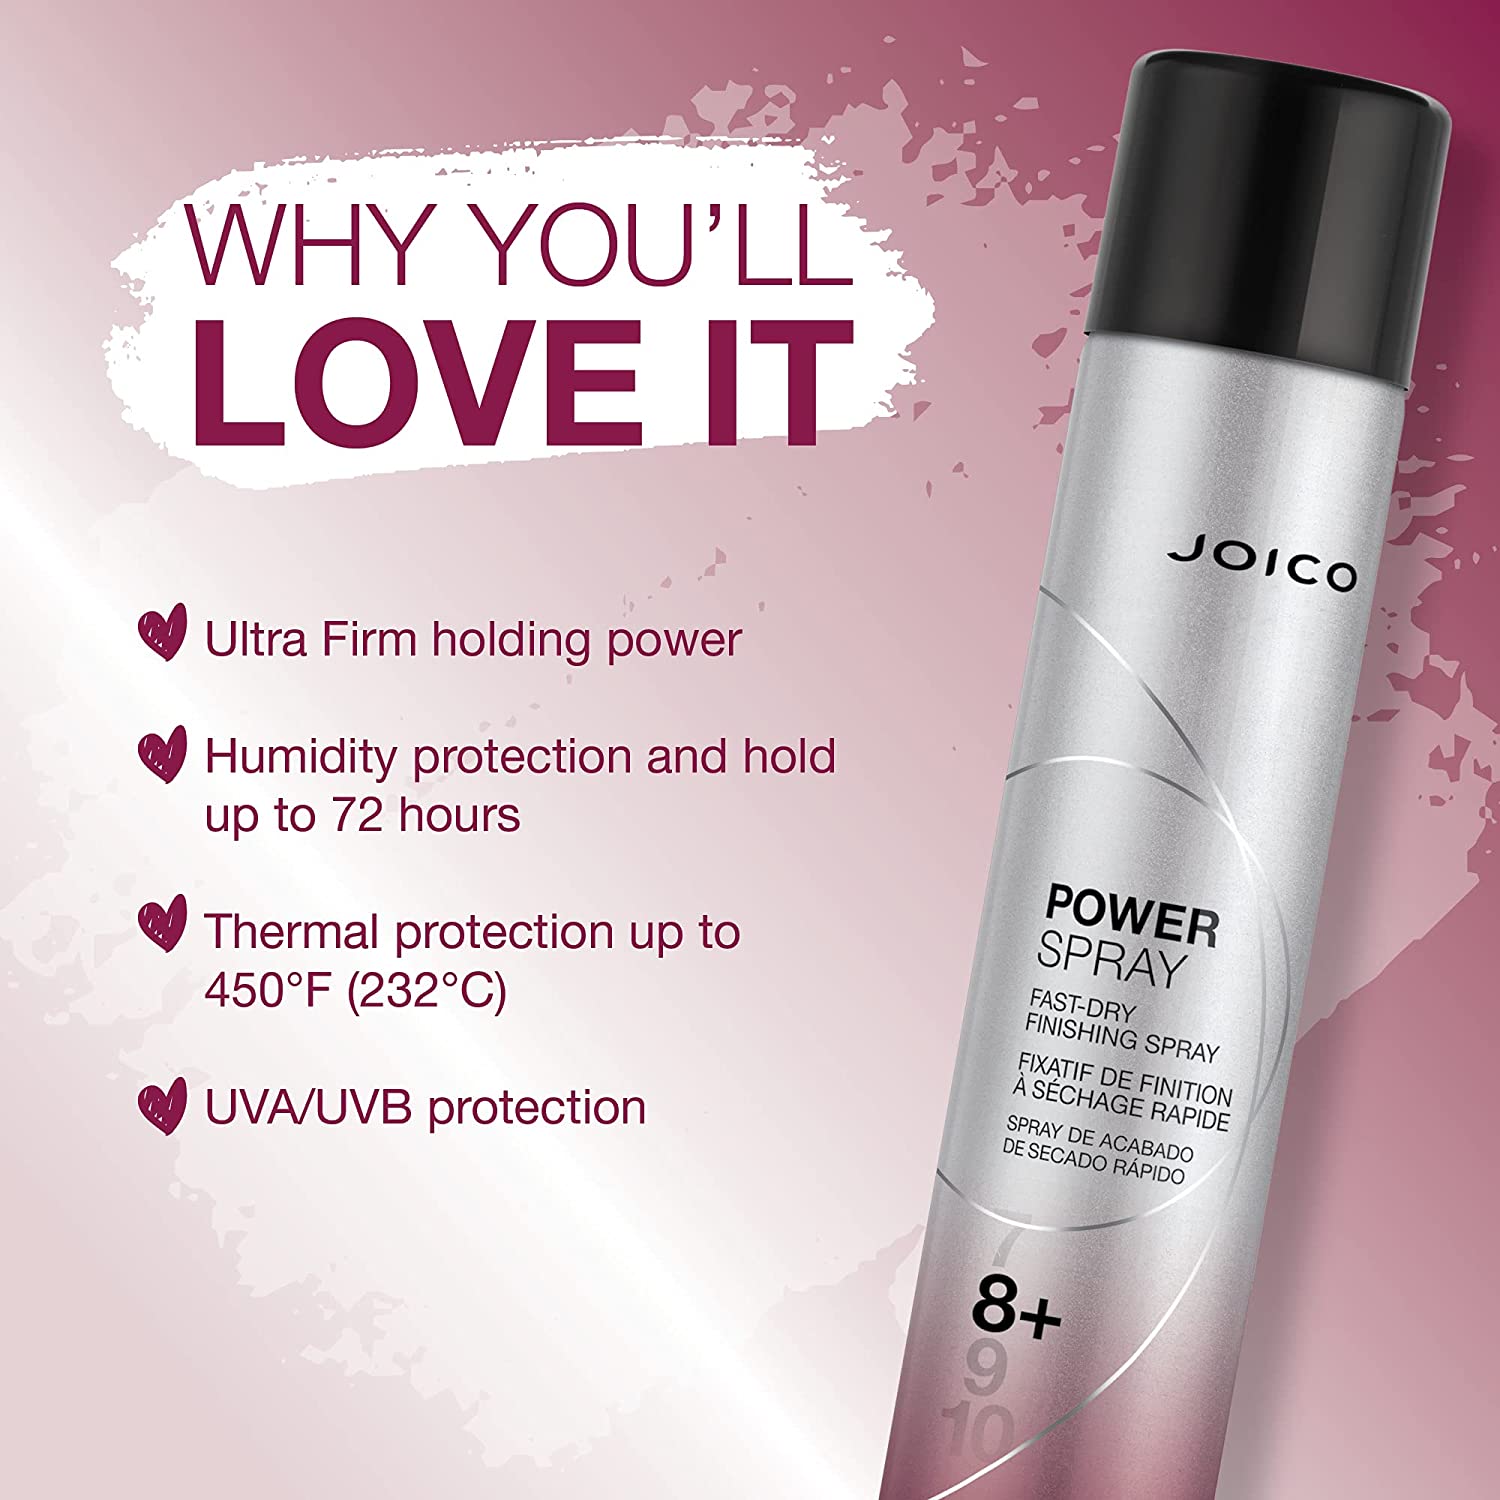 Powerspray Fast-Dry Finishing Spray - by Joico |ProCare Outlet|